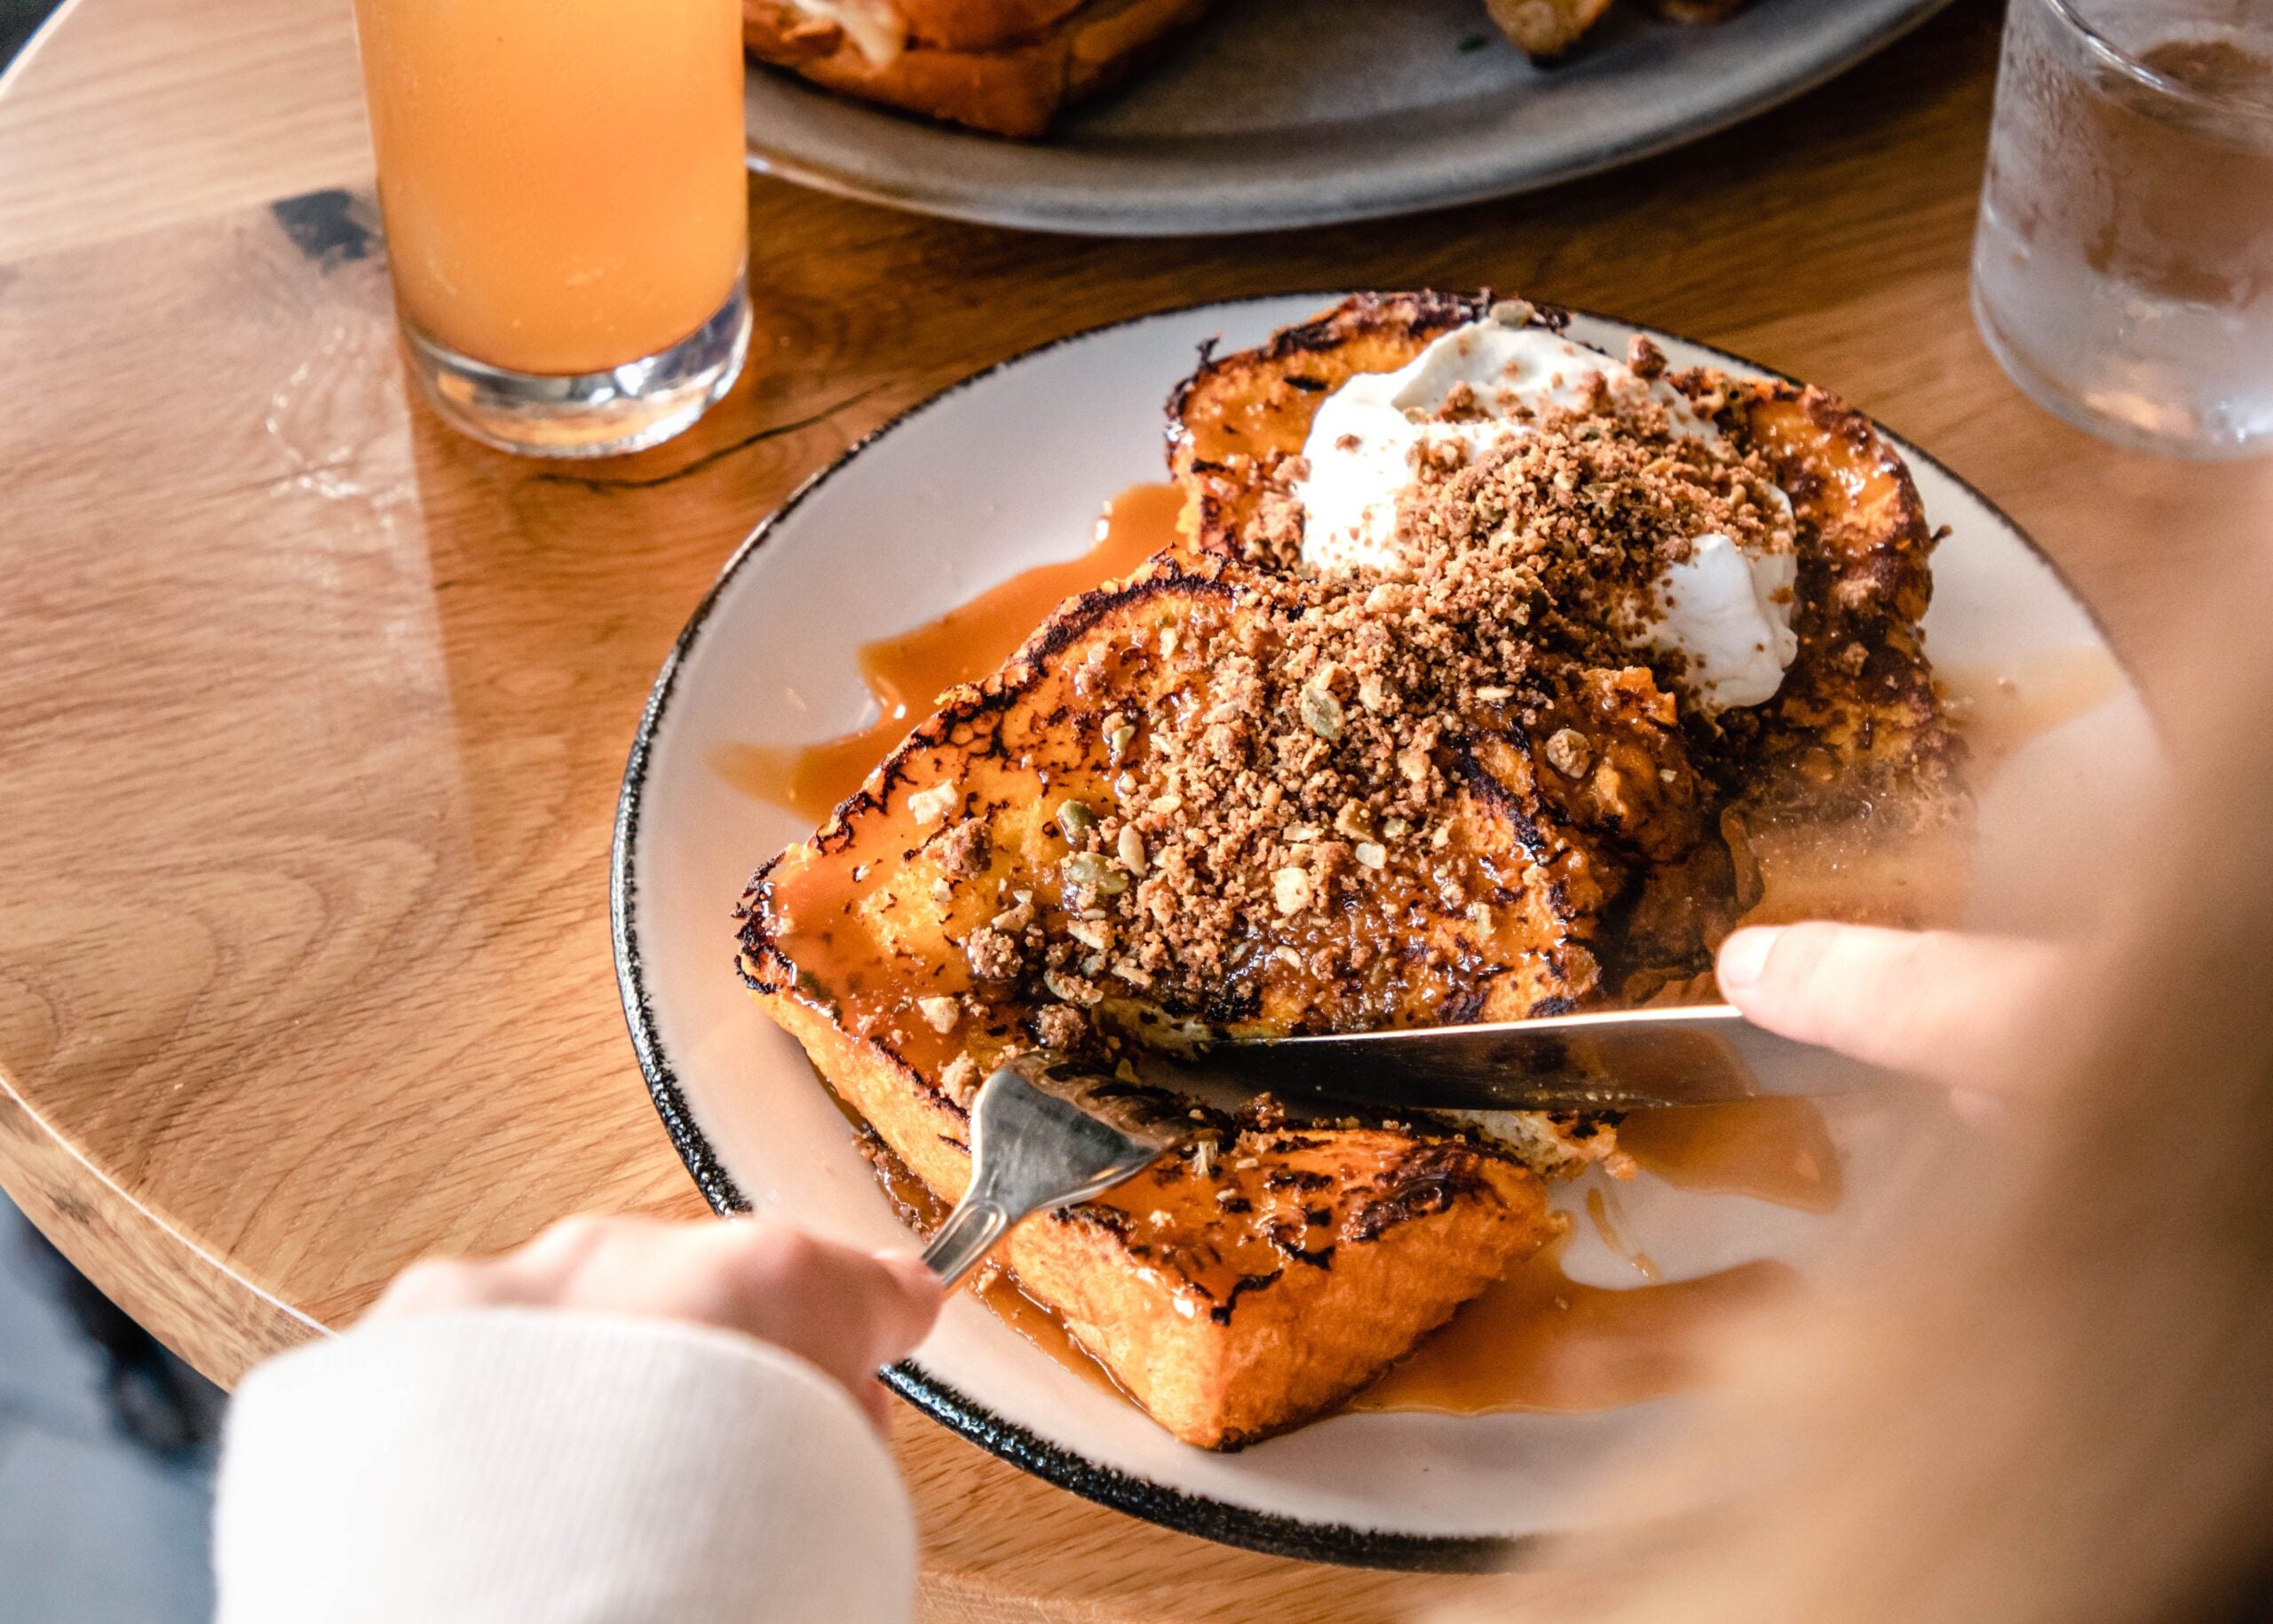 The Pumpkin Spice French Toast at Lucie